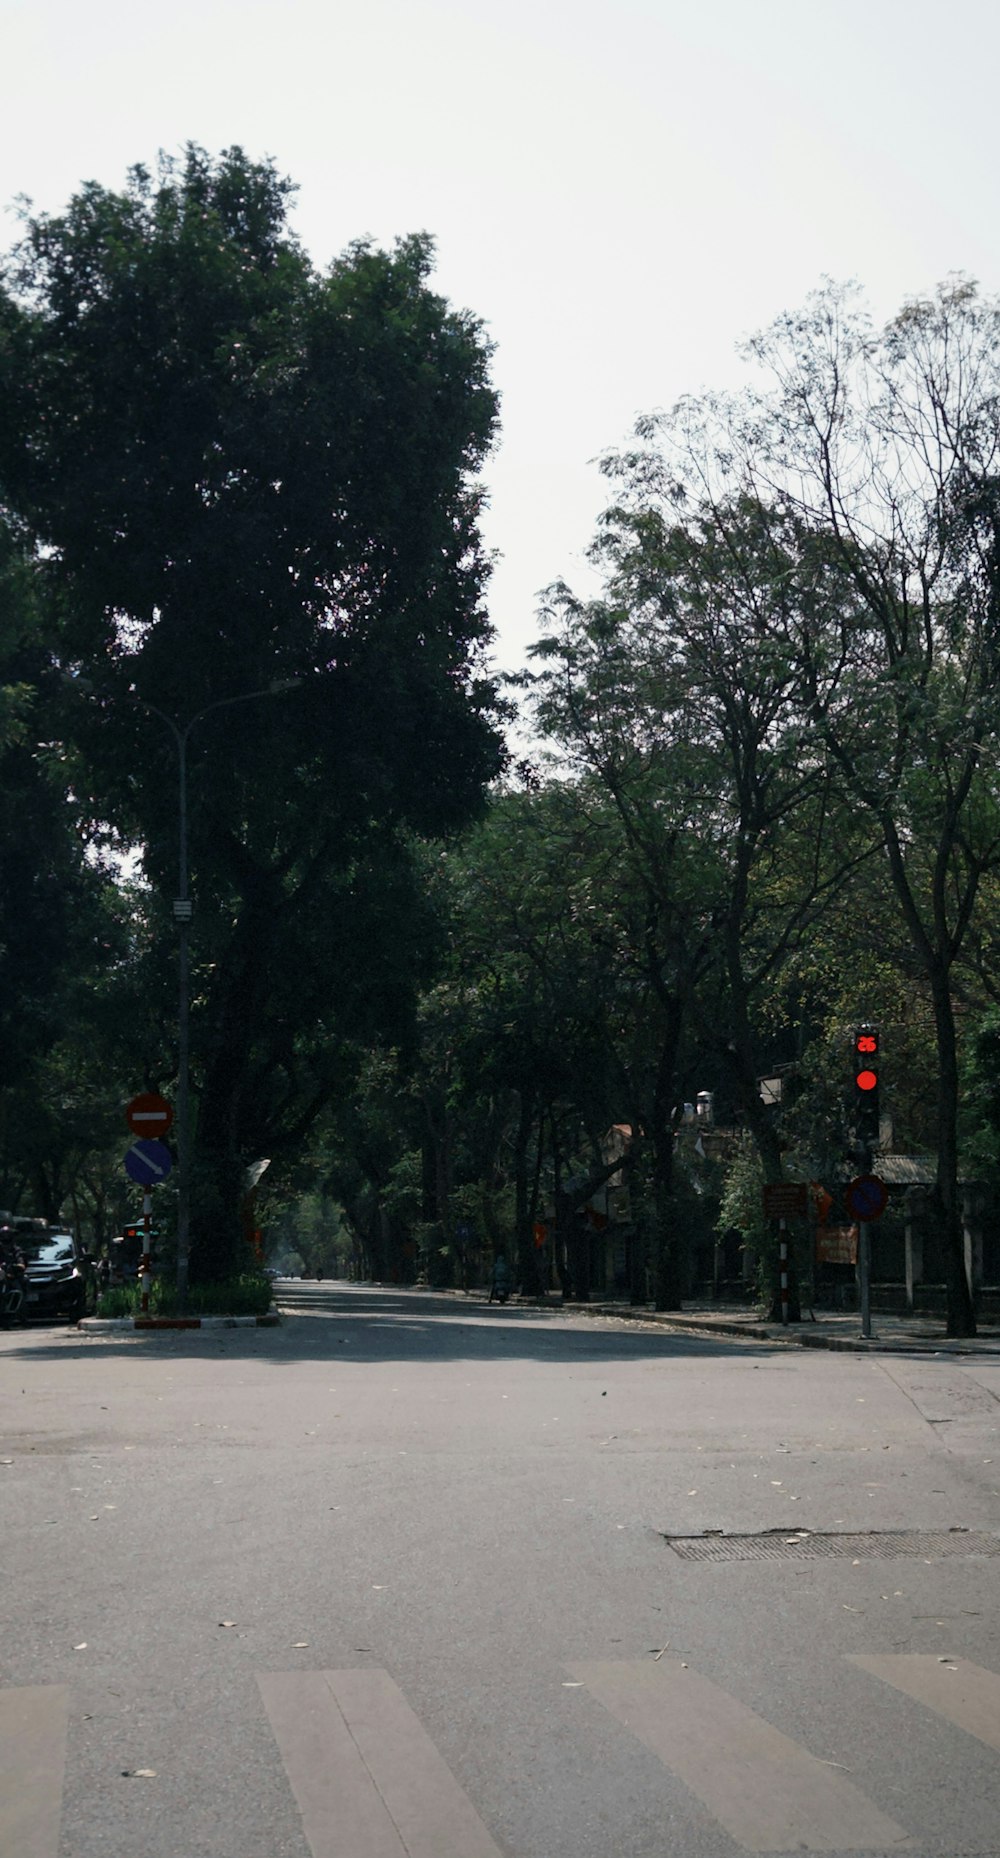 an empty street with a red traffic light